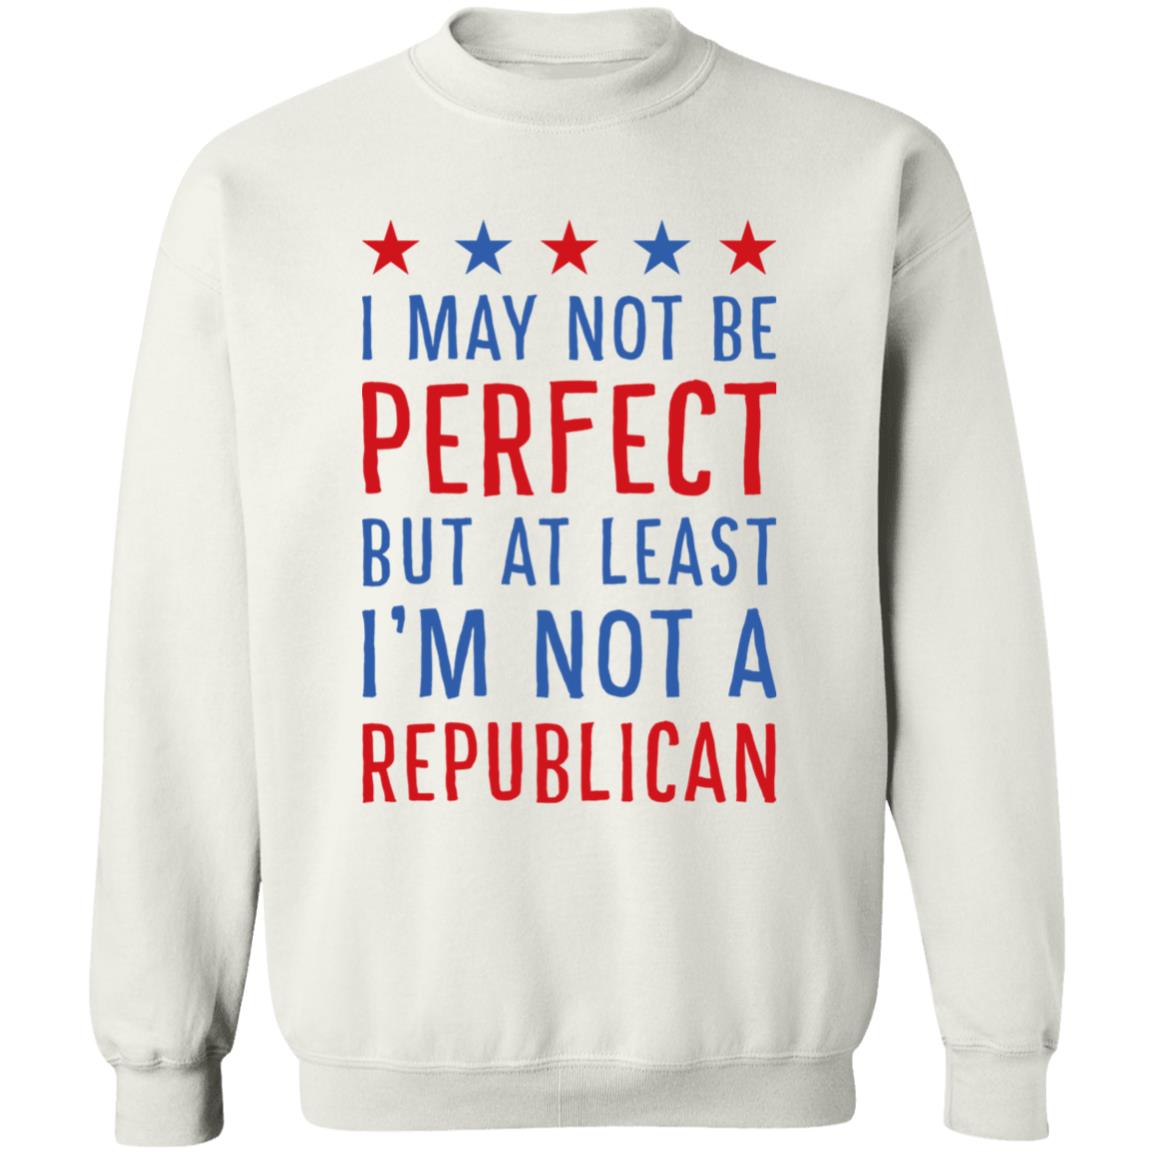 I May Not Be Perfect But At Least I’m Not A Republican Shirt 1